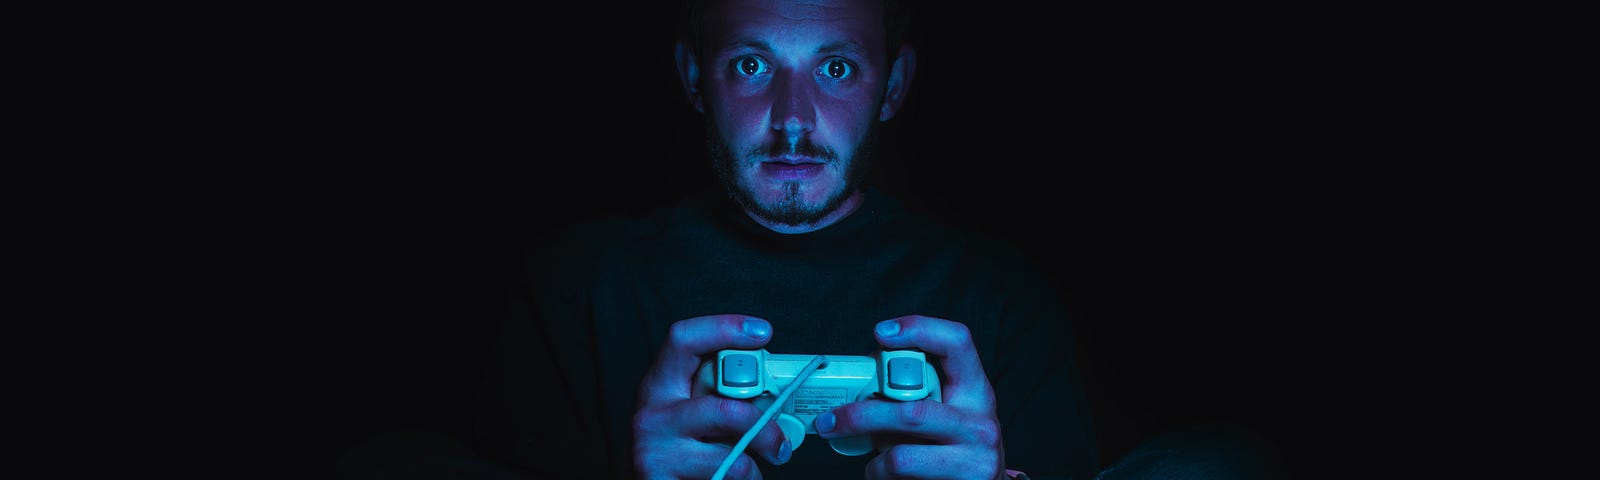 A man sits in the dark holding a video game controller. His look is mesmerized by the blue light of the game.